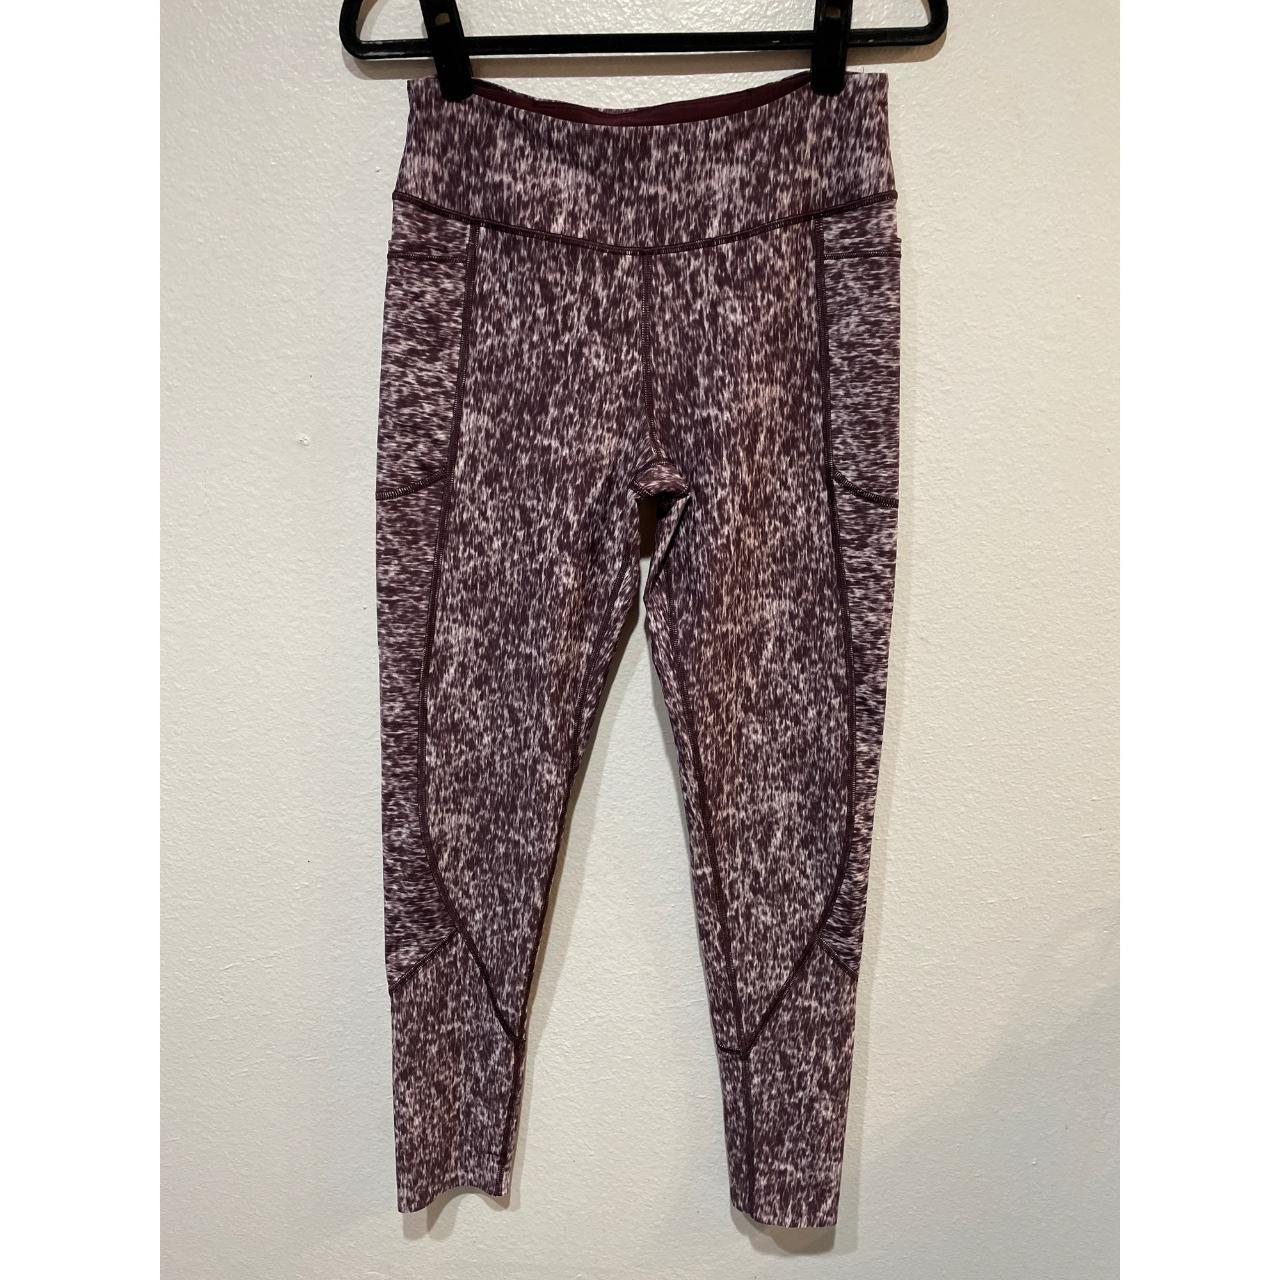 NWOT Victoria Sport M Leggings New without tags. - Depop